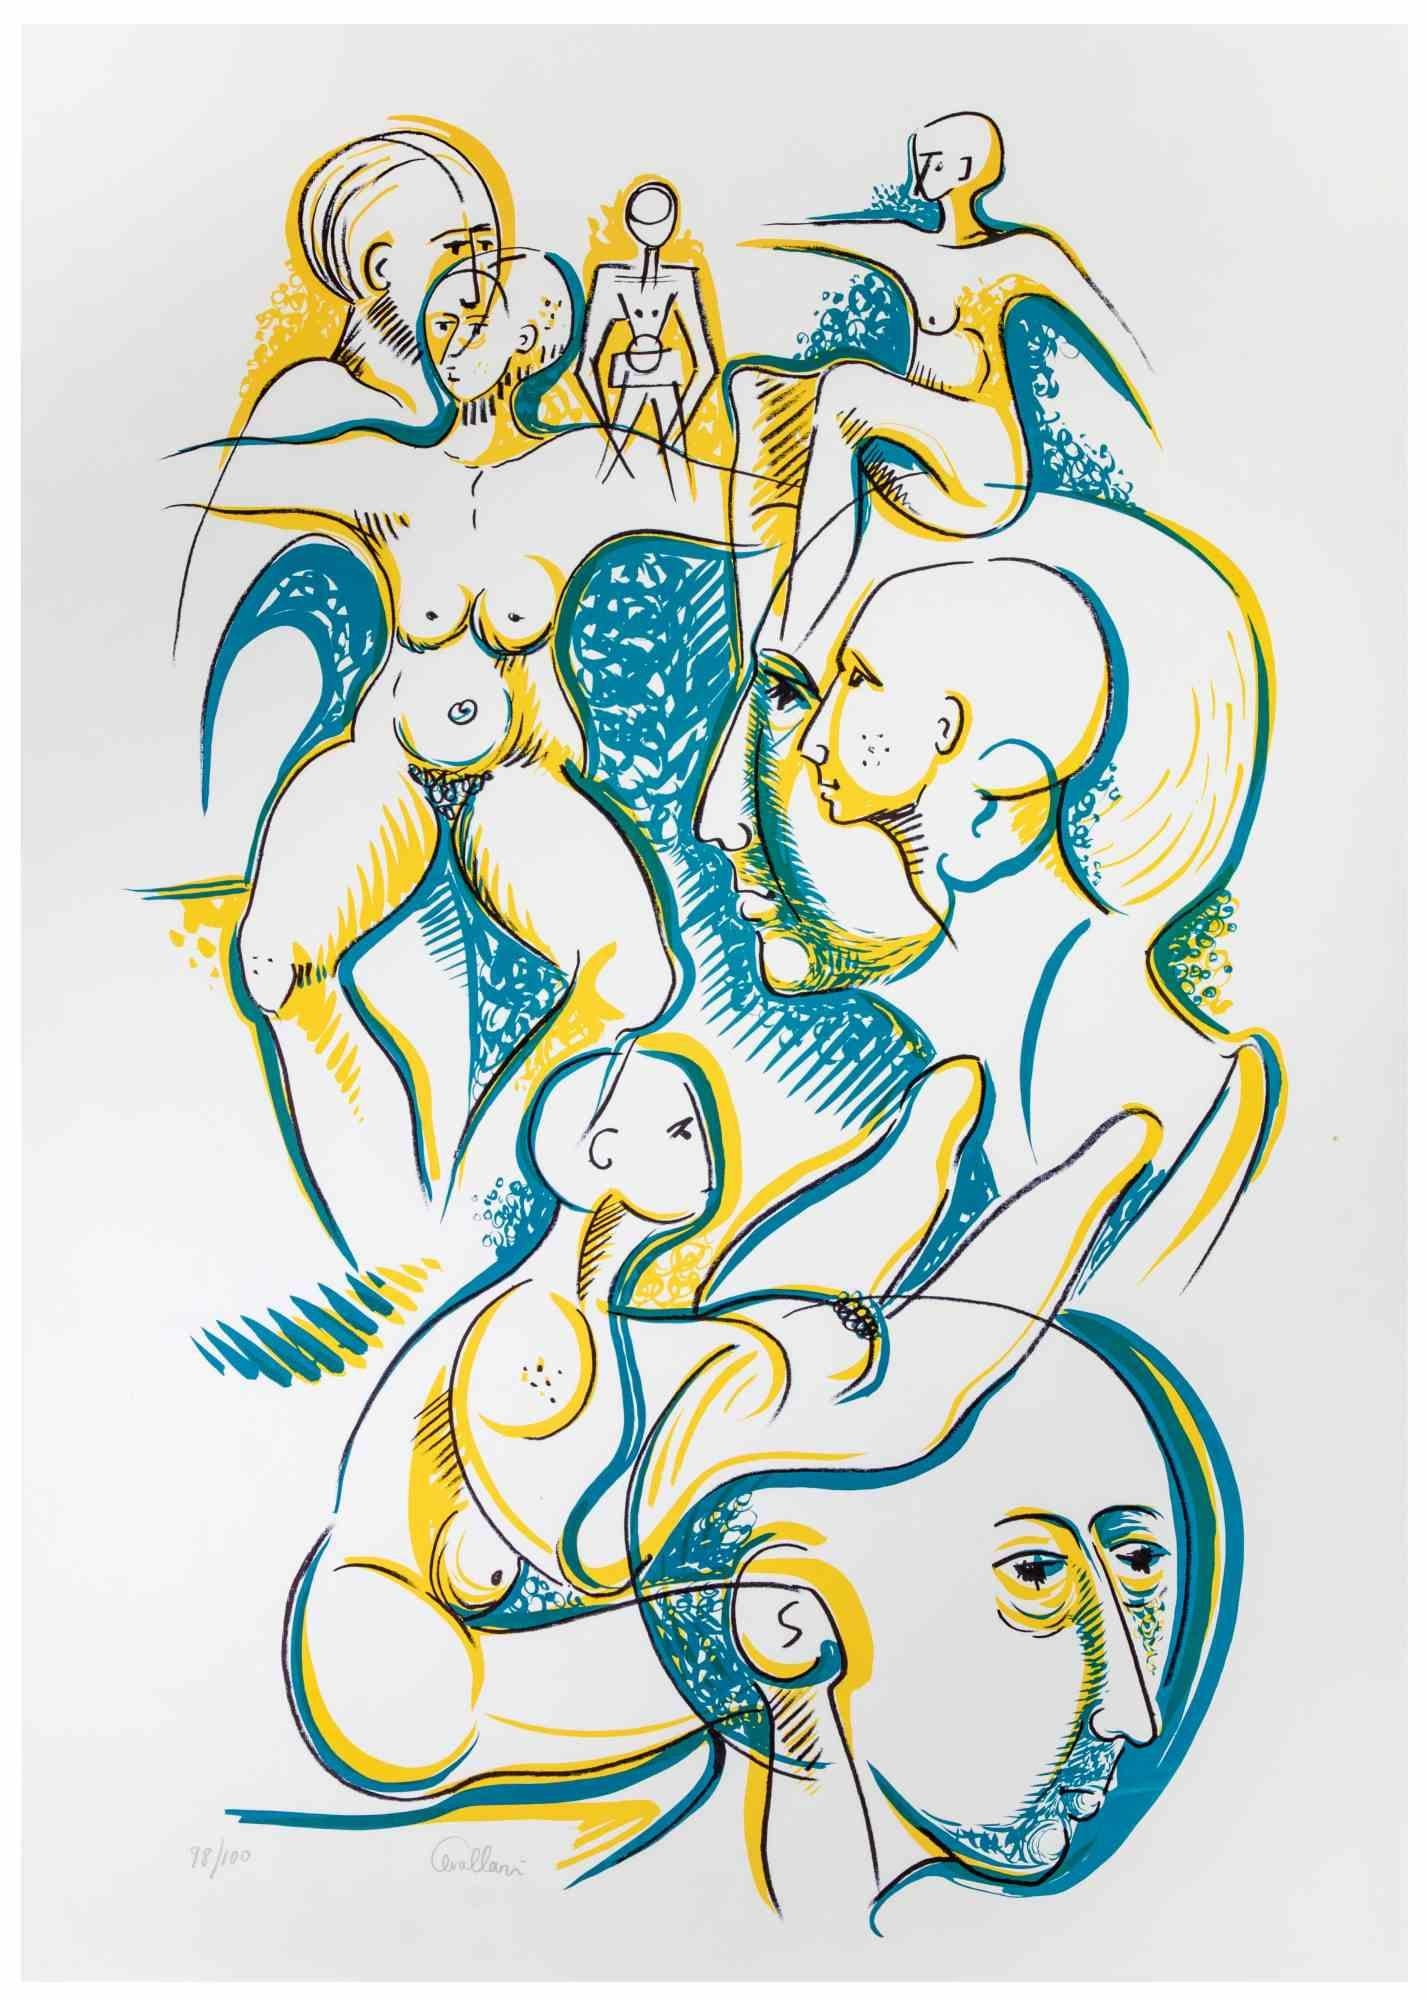 Blue and Yellow Figures is a lithograph on paper realized by Alberto Cavallari in the 1970s.

Hand-signed, and numbered, edition of 100 prints.

Good conditions.